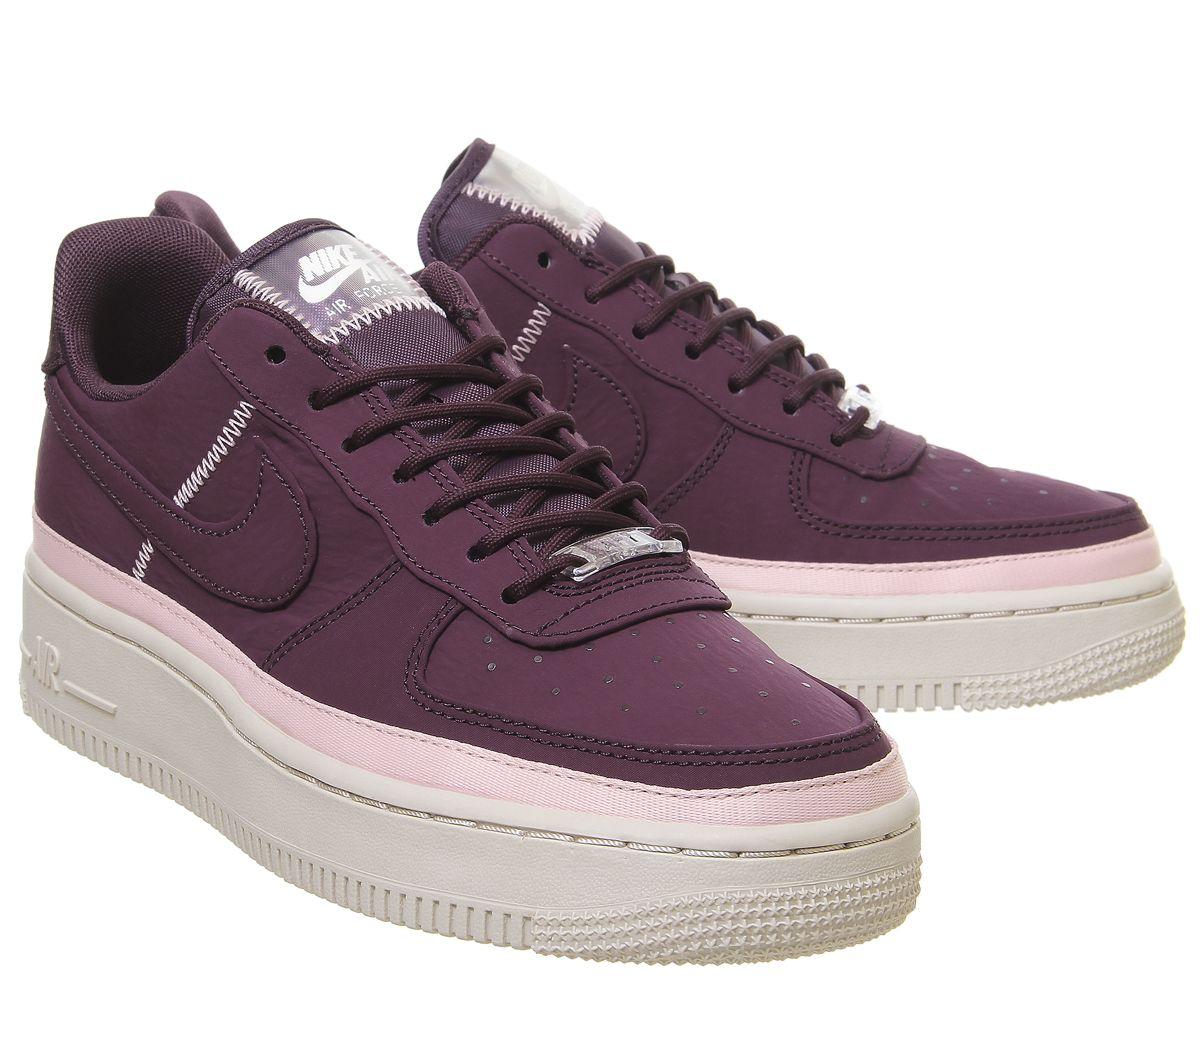 air force 1 07 trainers night maroon desert sand